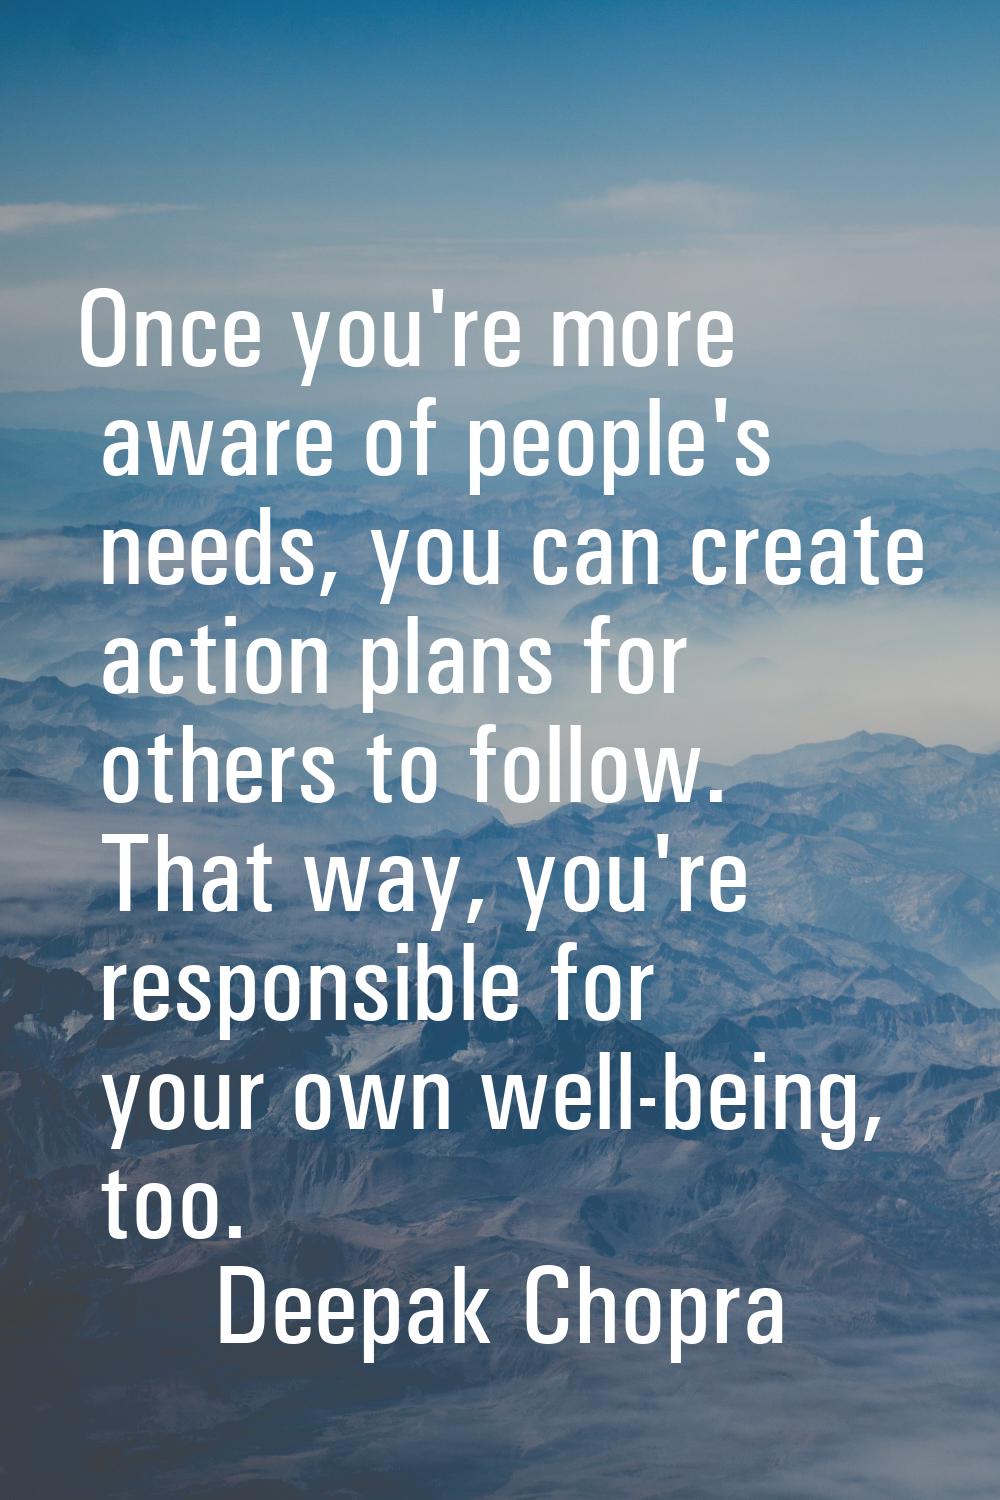 Once you're more aware of people's needs, you can create action plans for others to follow. That wa